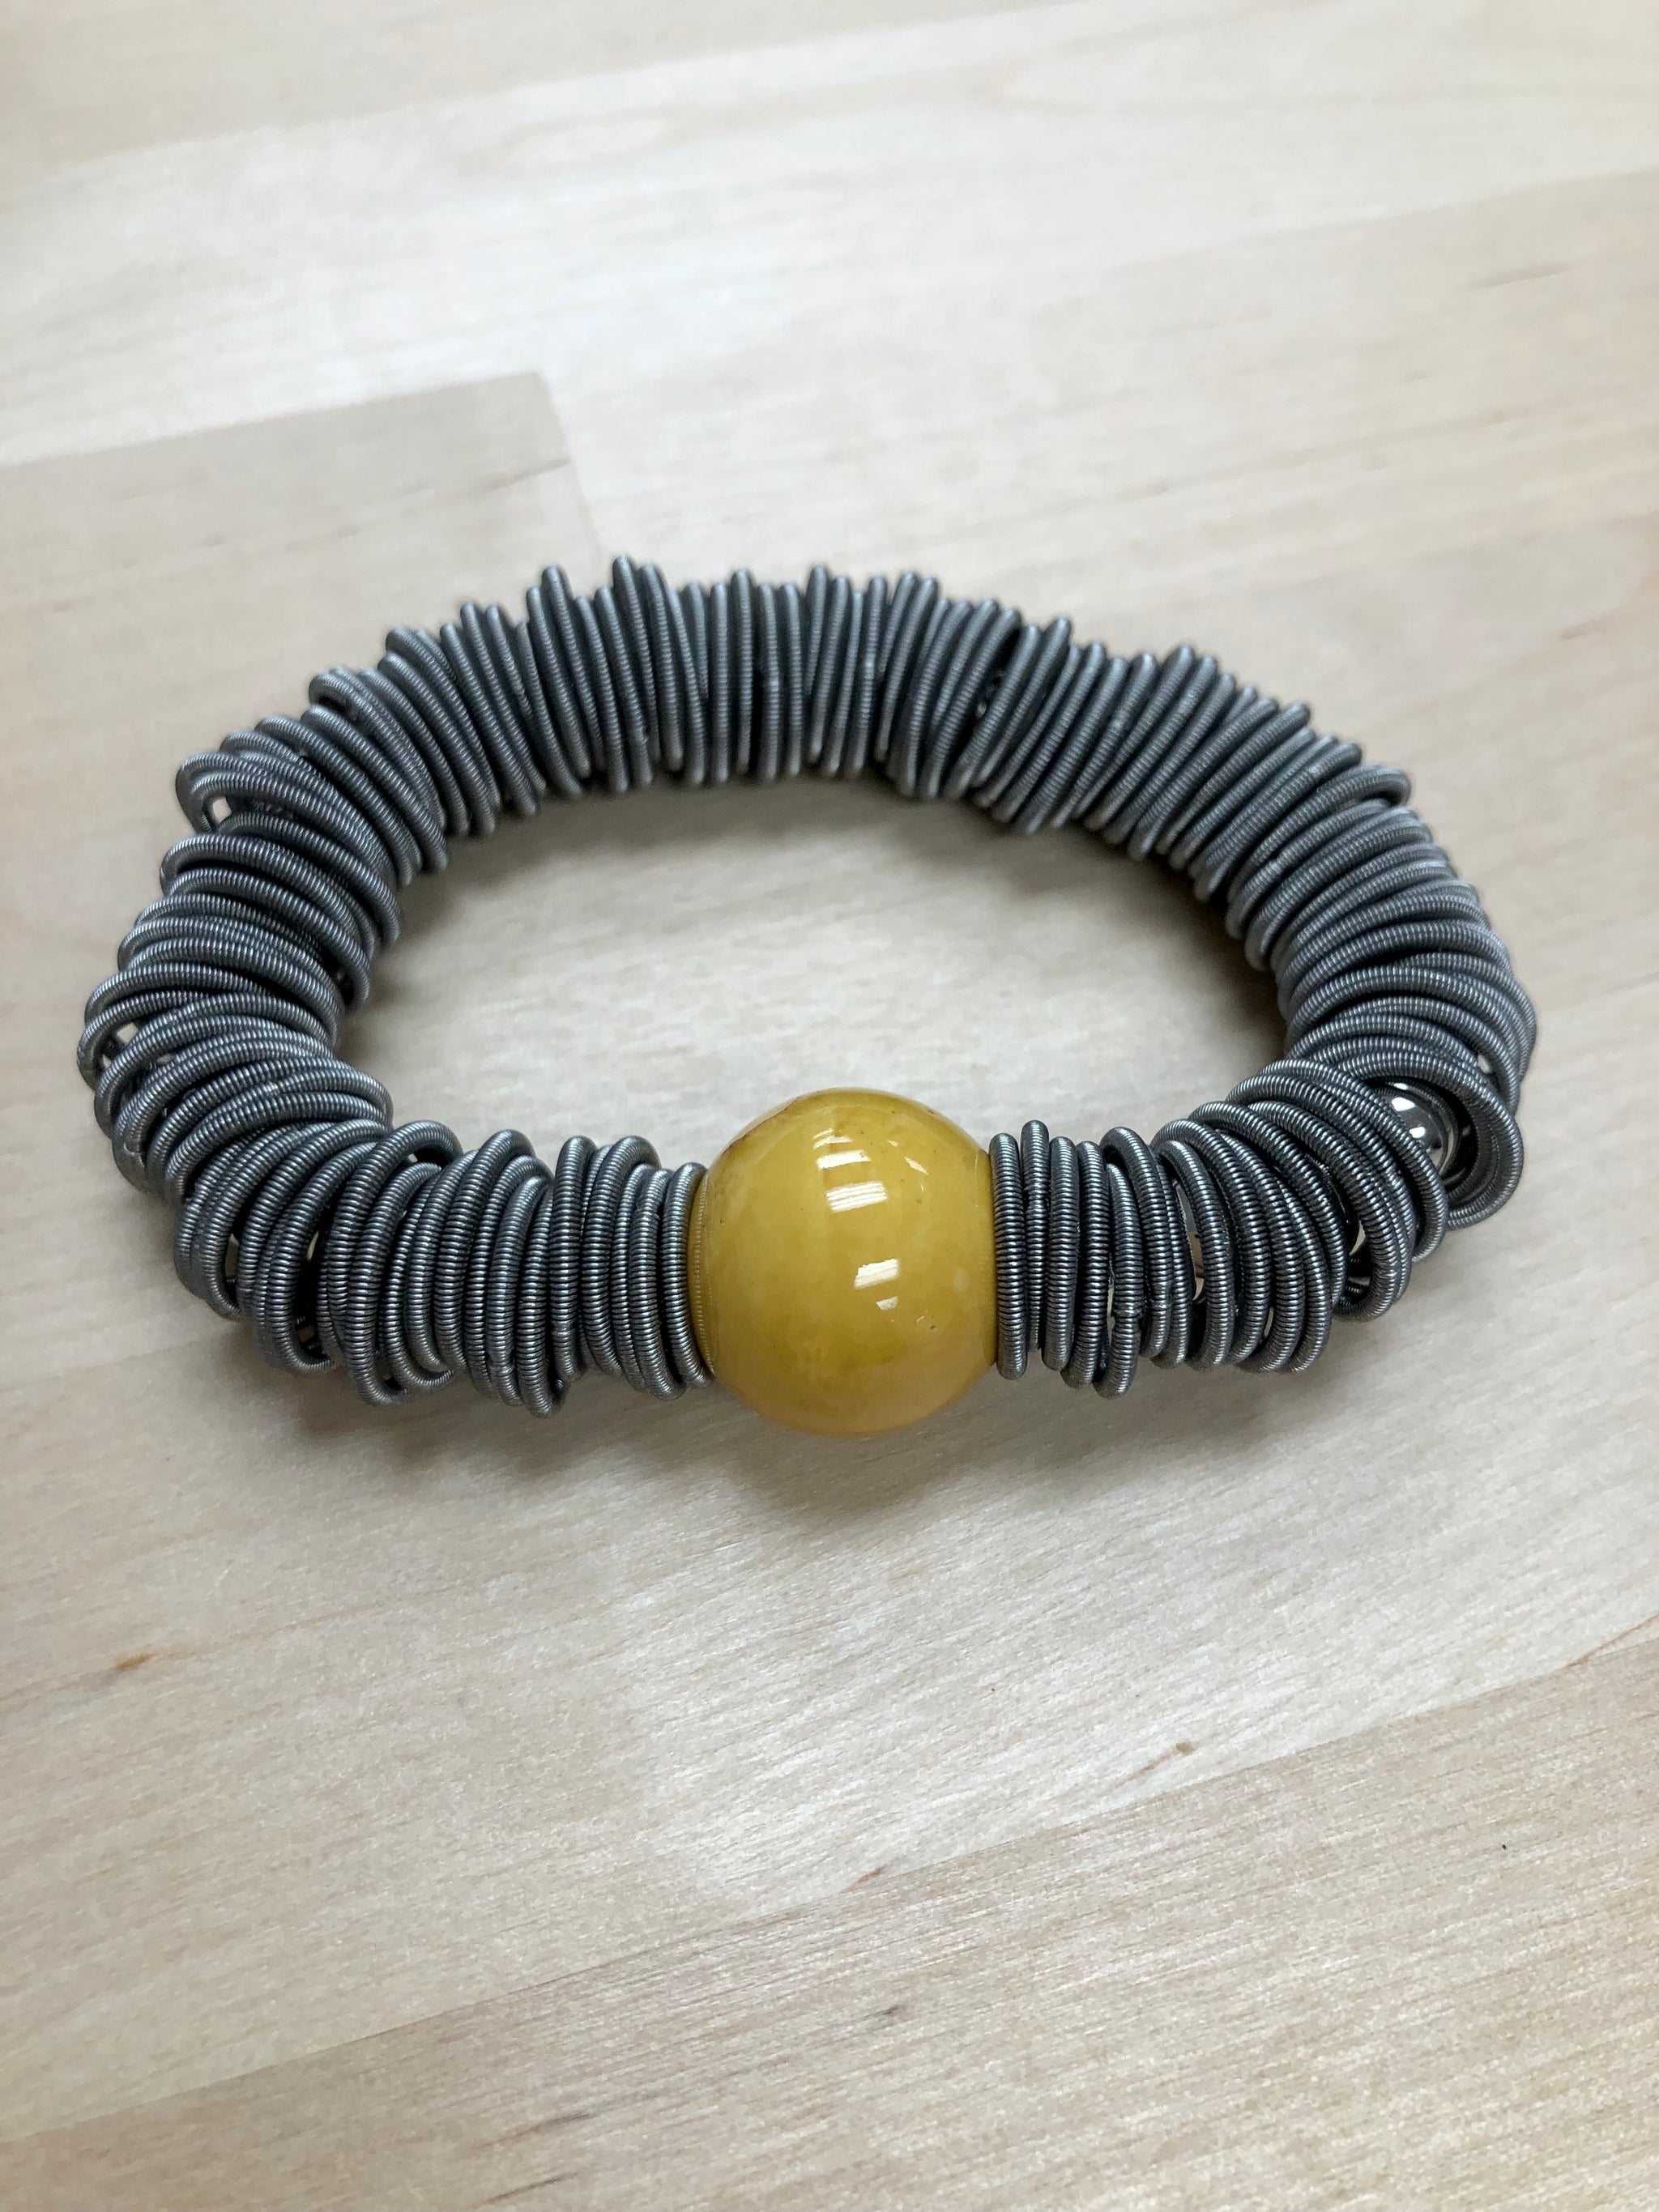 S104BR - Slate & spring ring bracelet with yellow porcelain bead